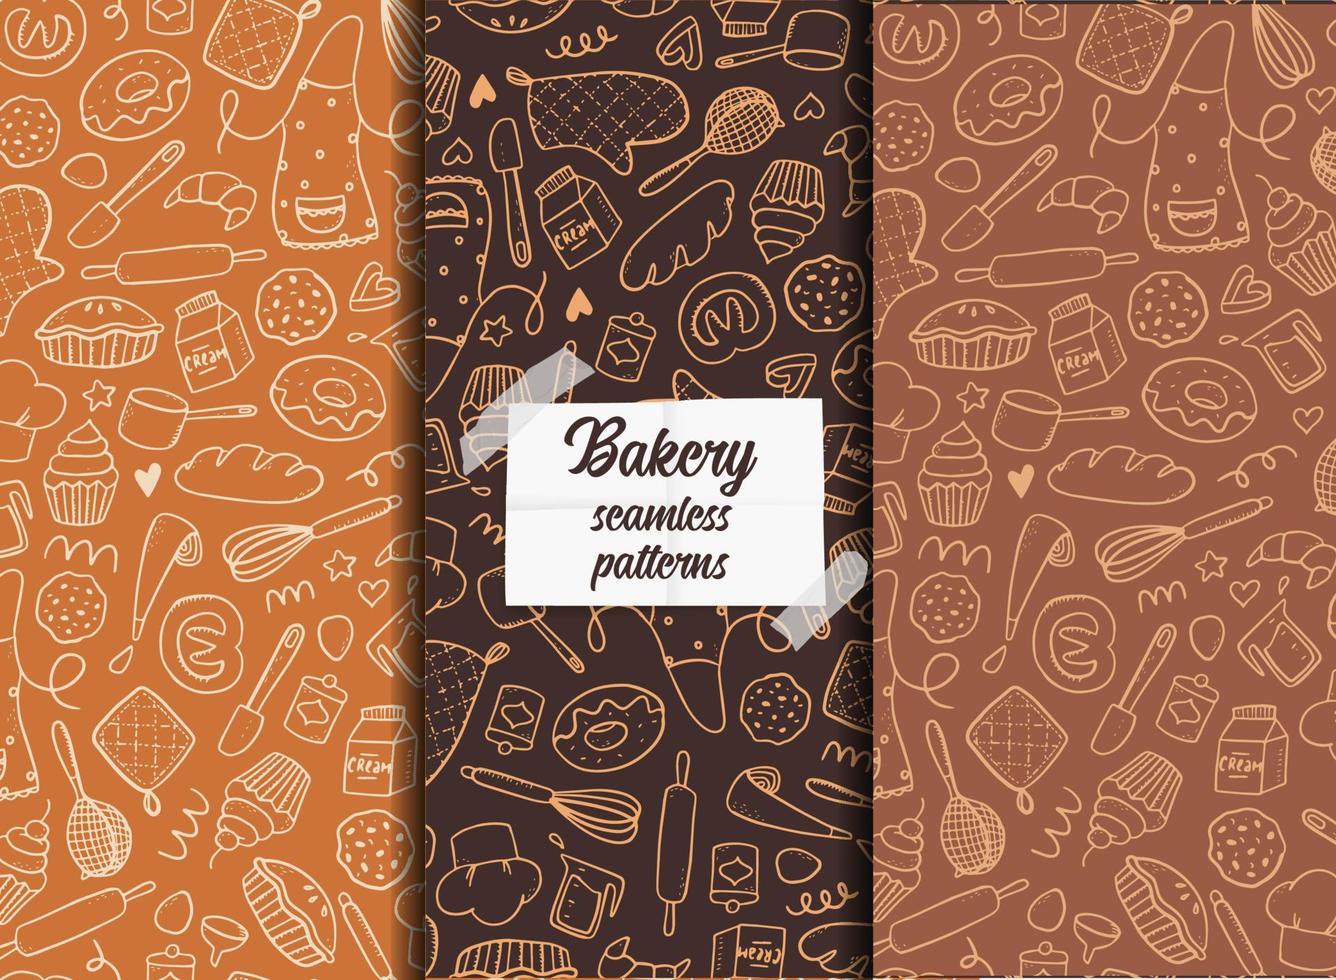 set of bakery seamless patterns with hand drawn doodles on brown backgrounds. Wrapping paper, packaging, textile abd fabric prints design. EPS 10 vector